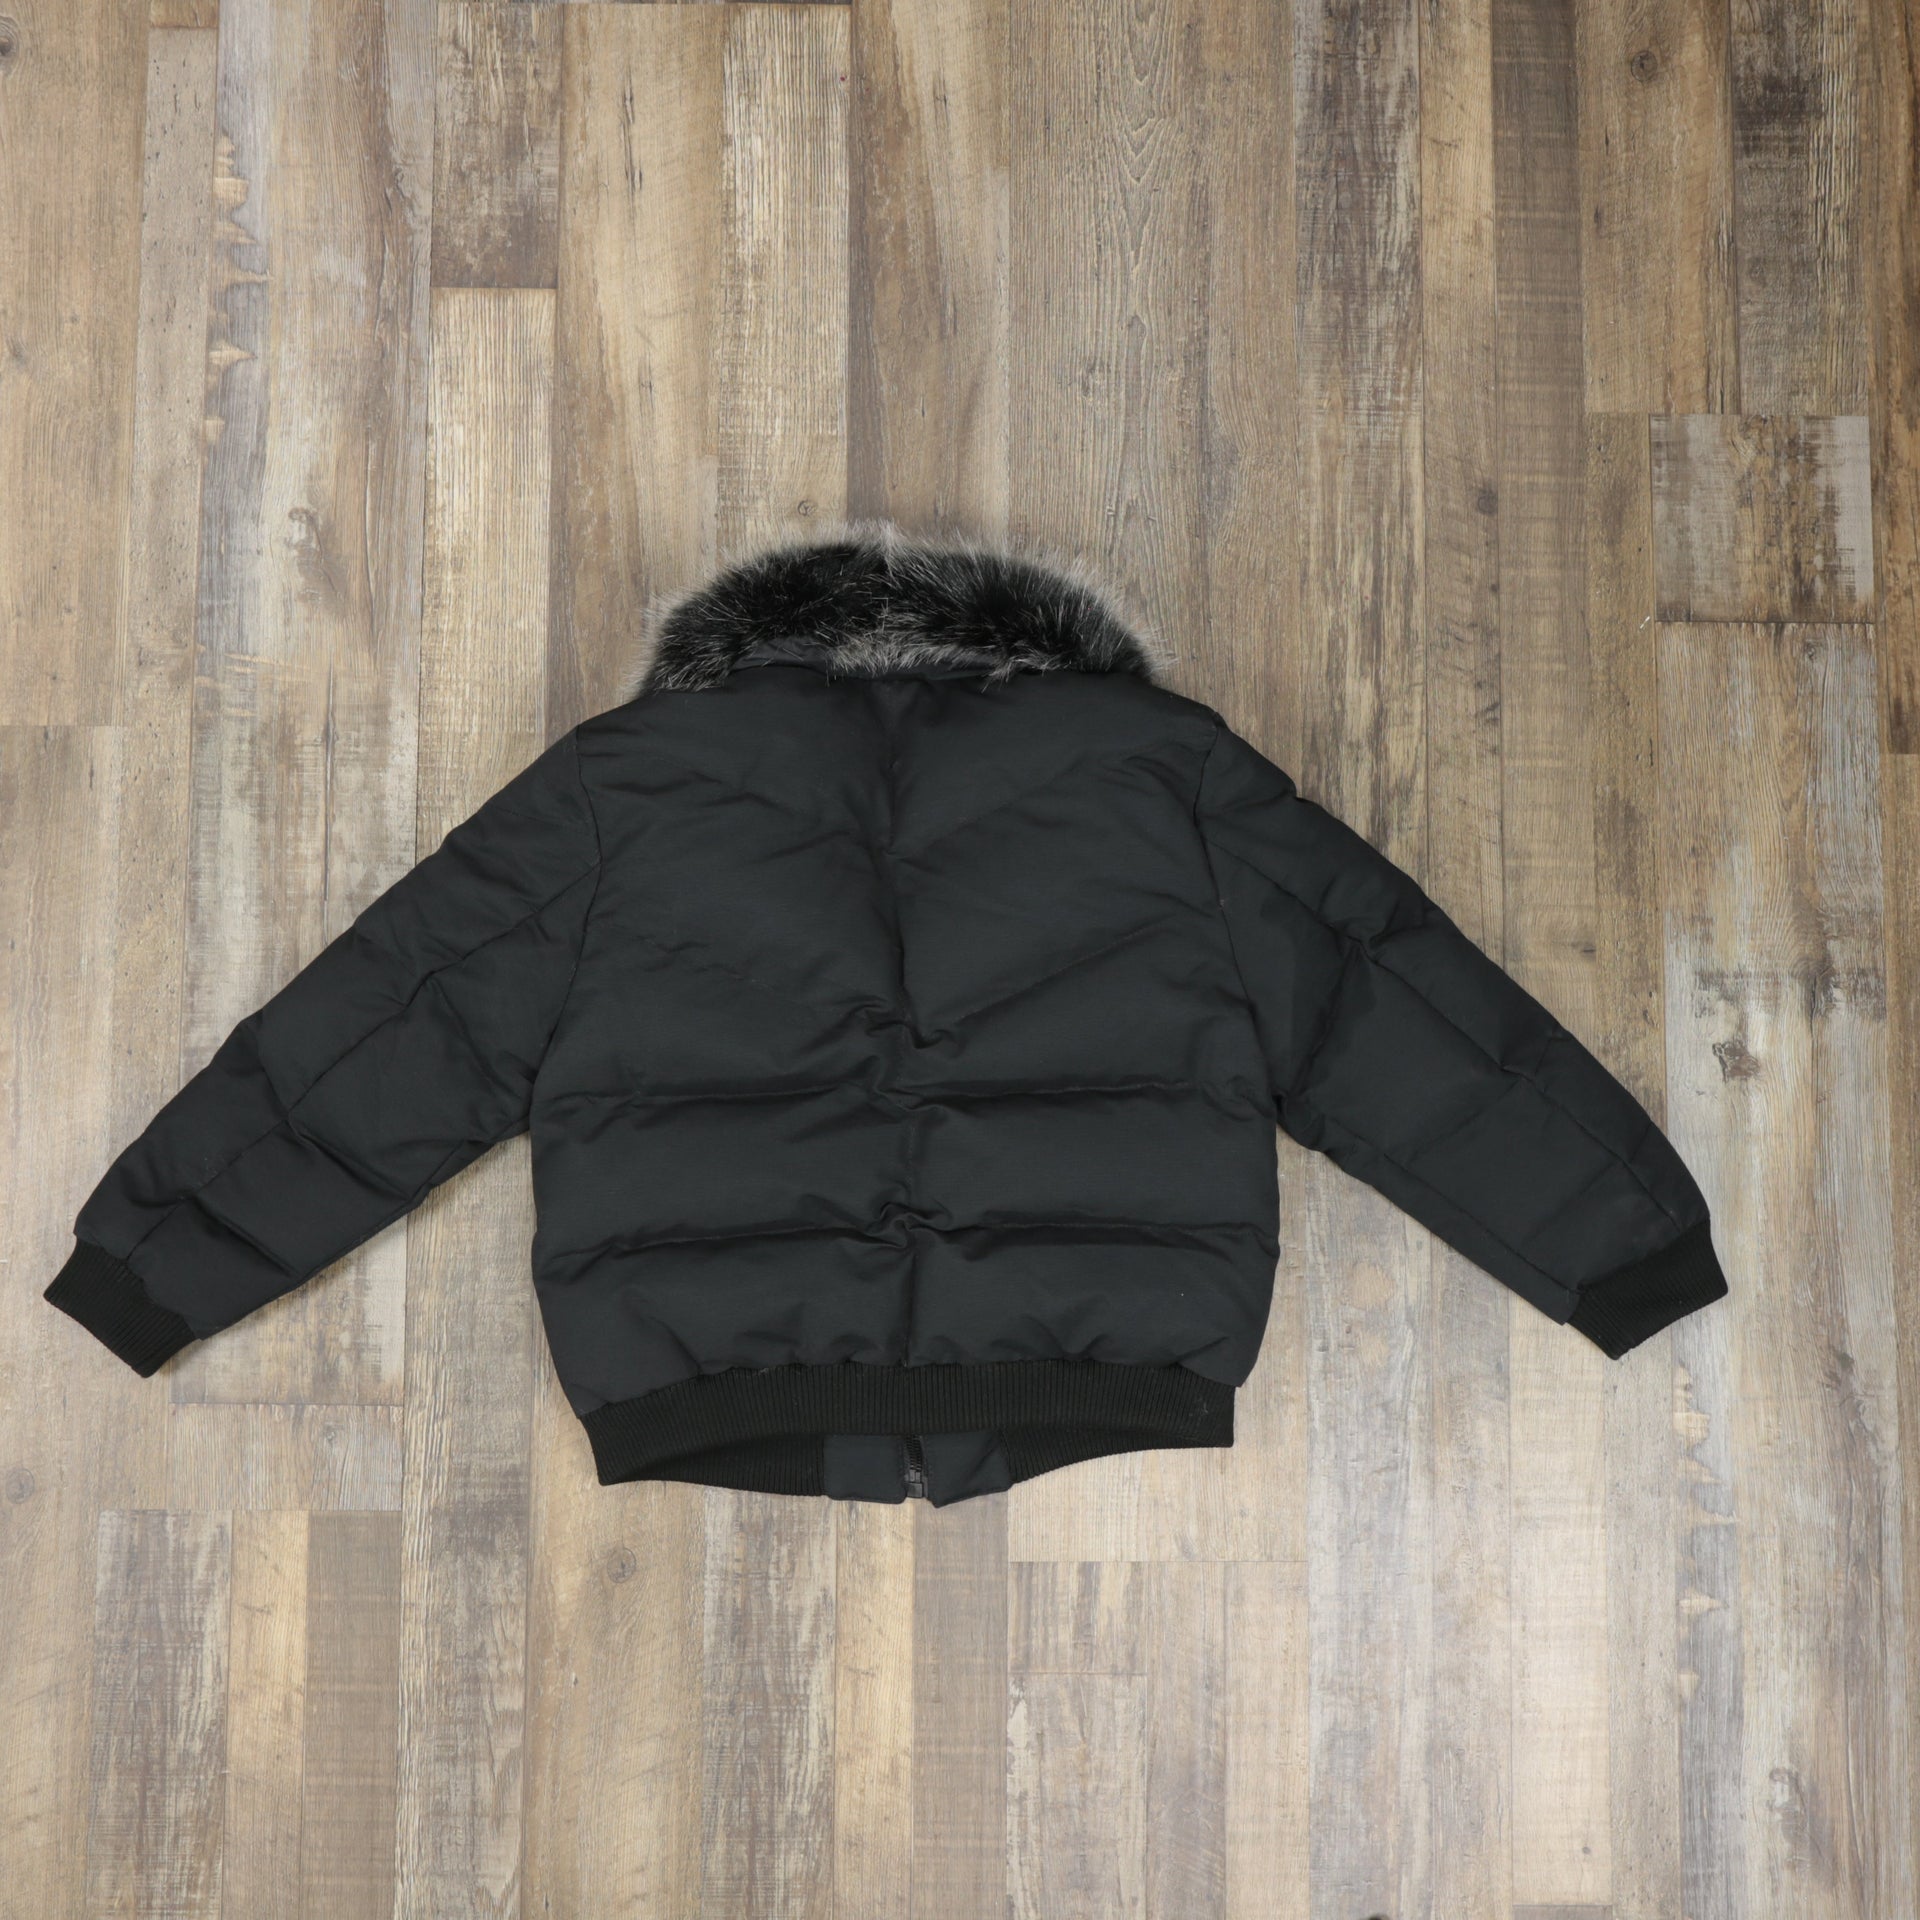 back of the jacket with no hood Youth Black Bubble Puffer Parka Jacket With Removable Faux Fur Hood (Vegan Fur)